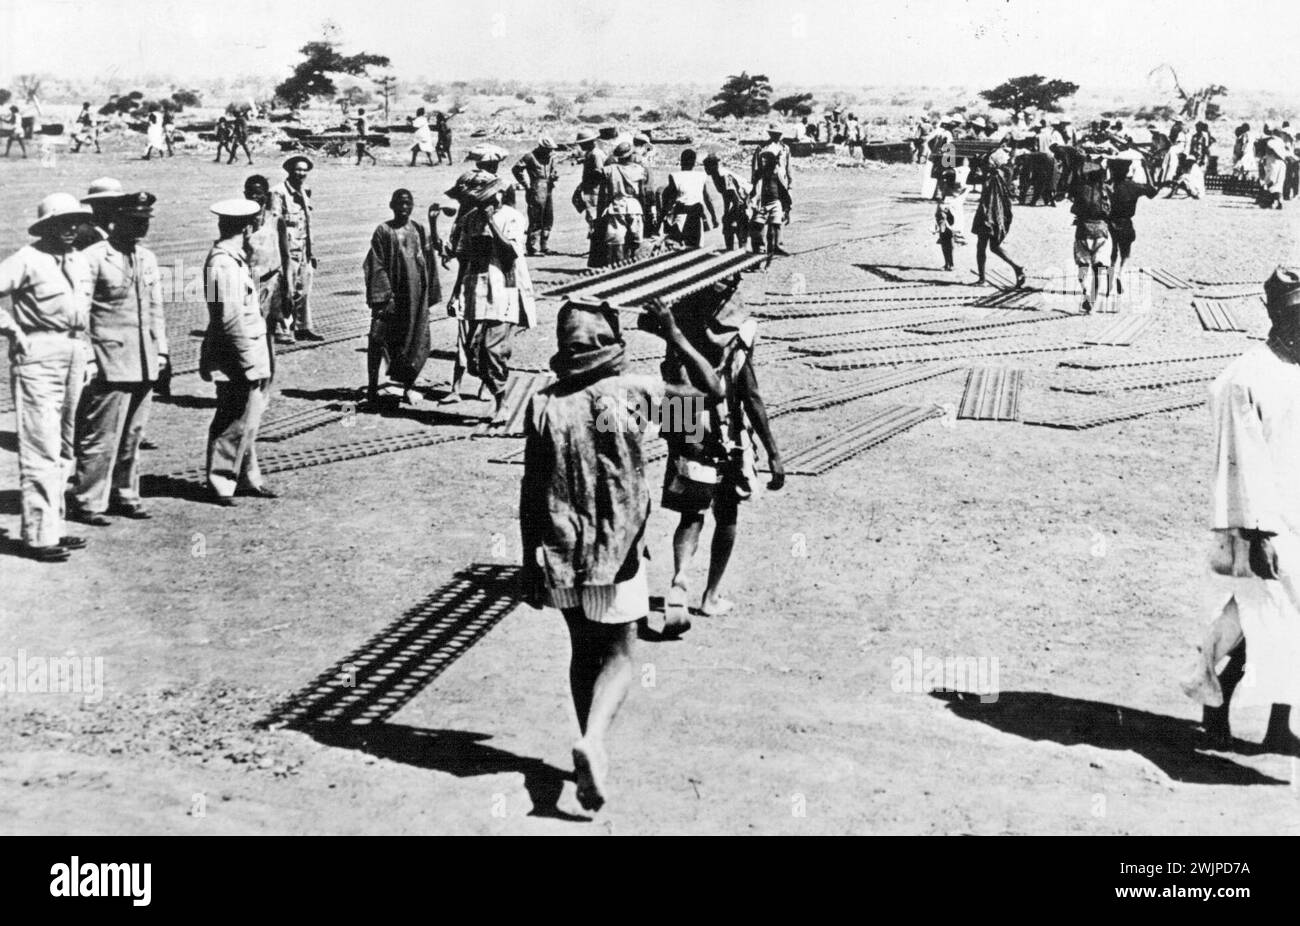 Americans In Dakar -- American Army engineers (left) supervise construction of a mile long runway for a new air base at Dakar, French West Africa. January 1, 1943. (Photo by U.S. Office of War Information). Stock Photo